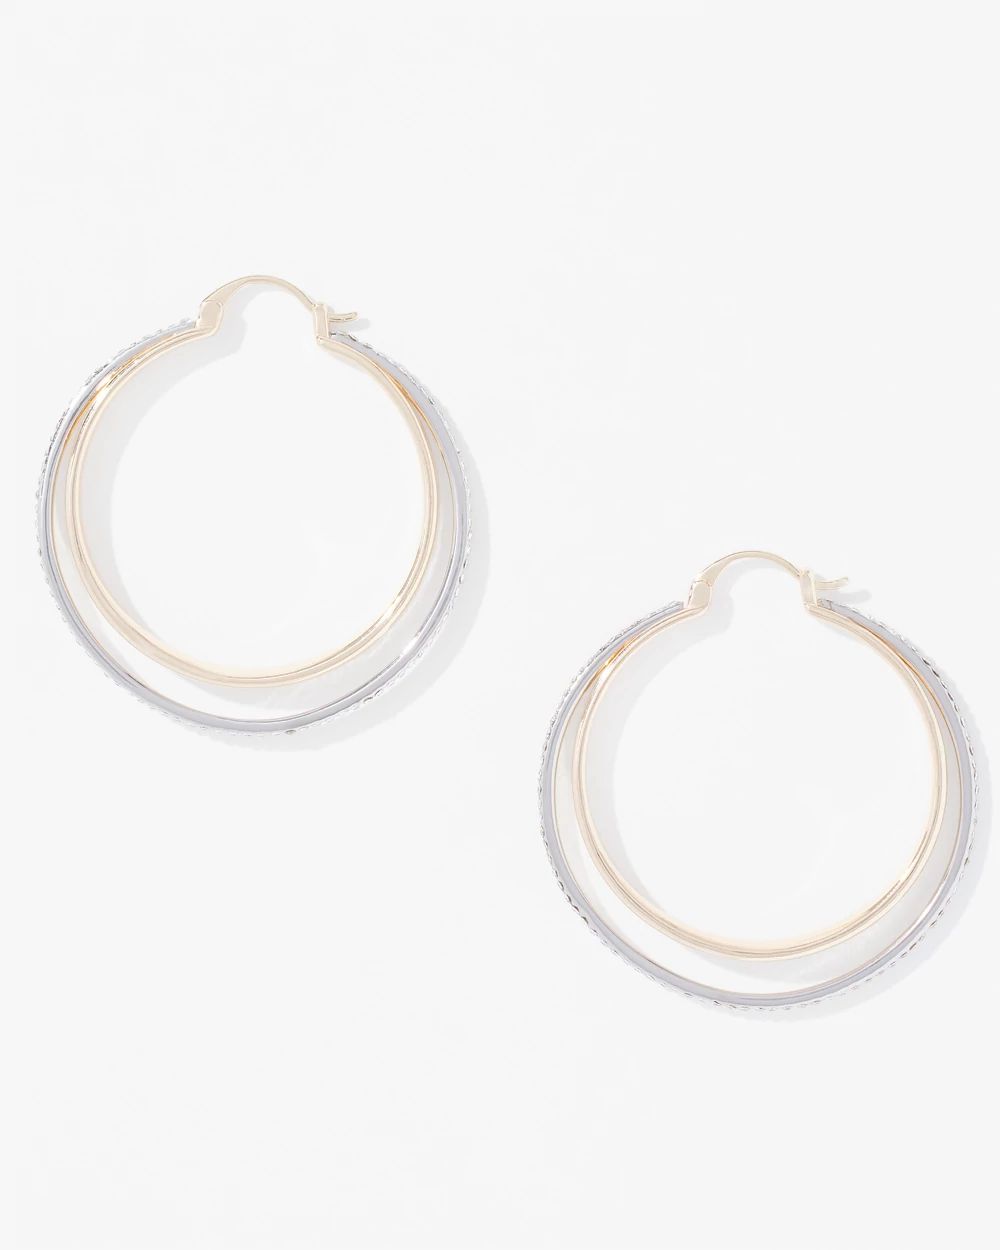 Mixed Metal Double Pave Hoop Earrings click to view larger image.